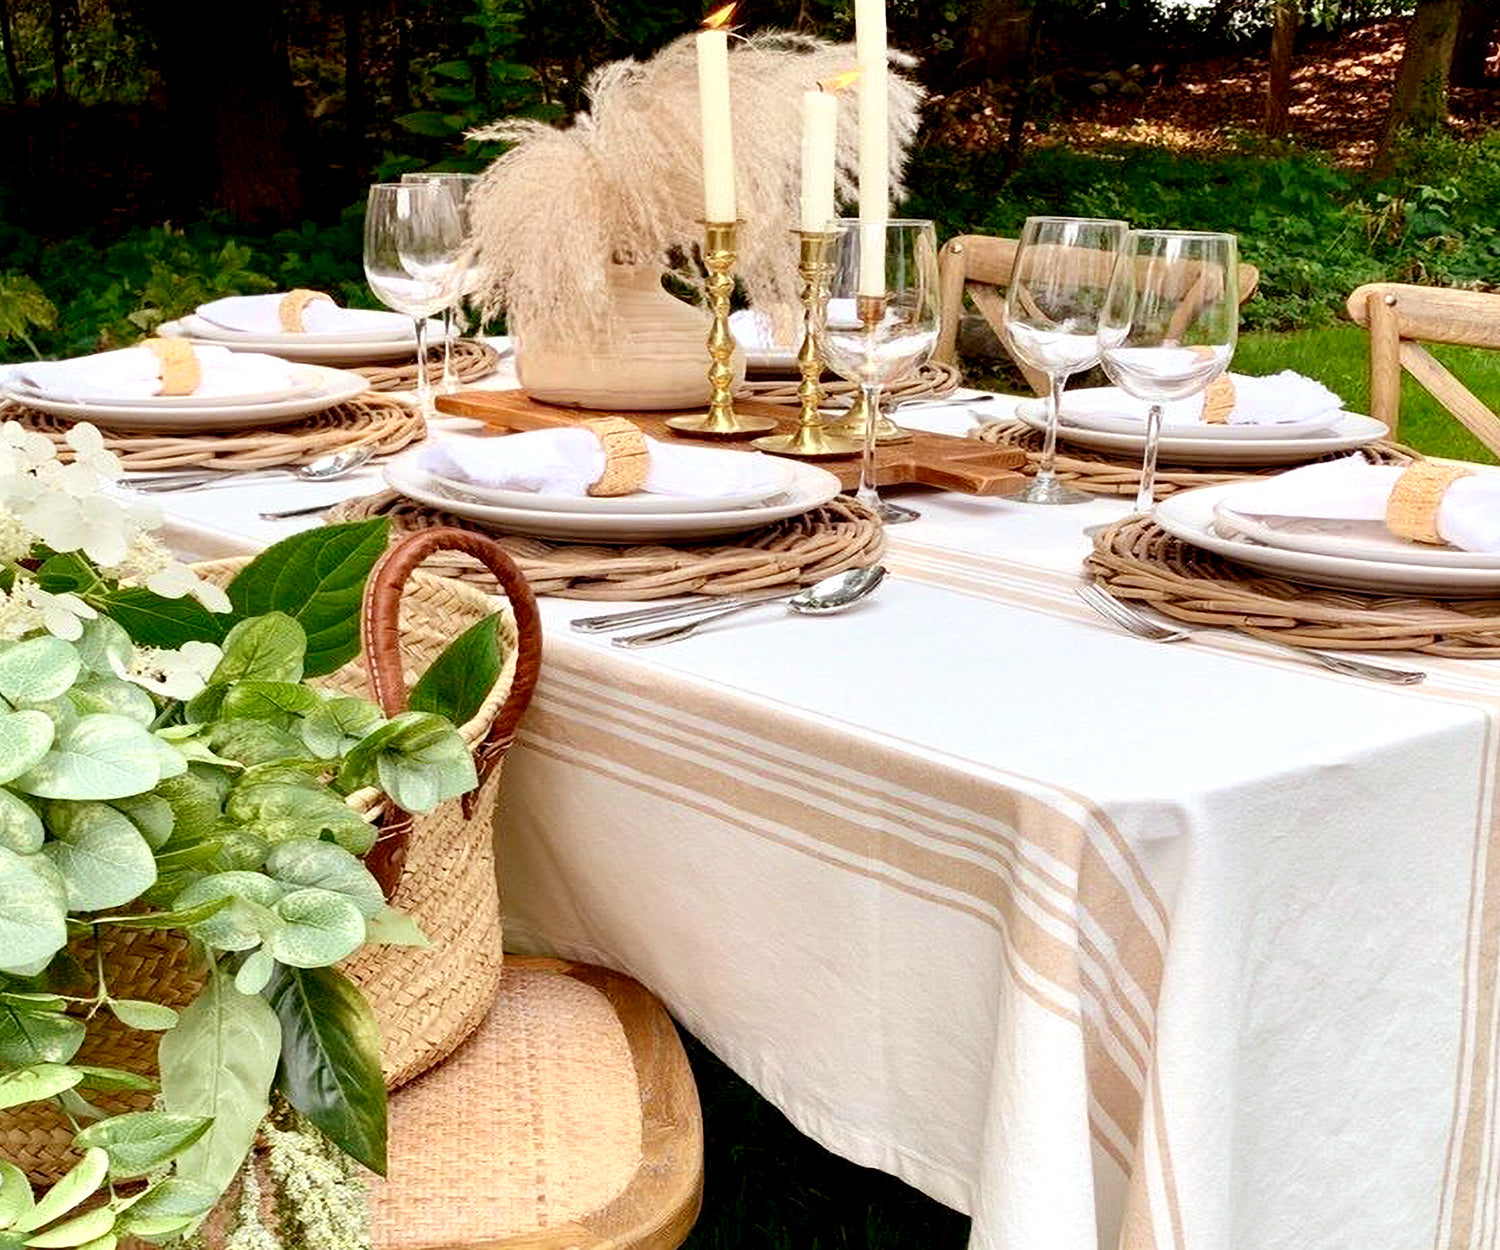 Hosting Guests This Fall? Get Ready Now With These Steps